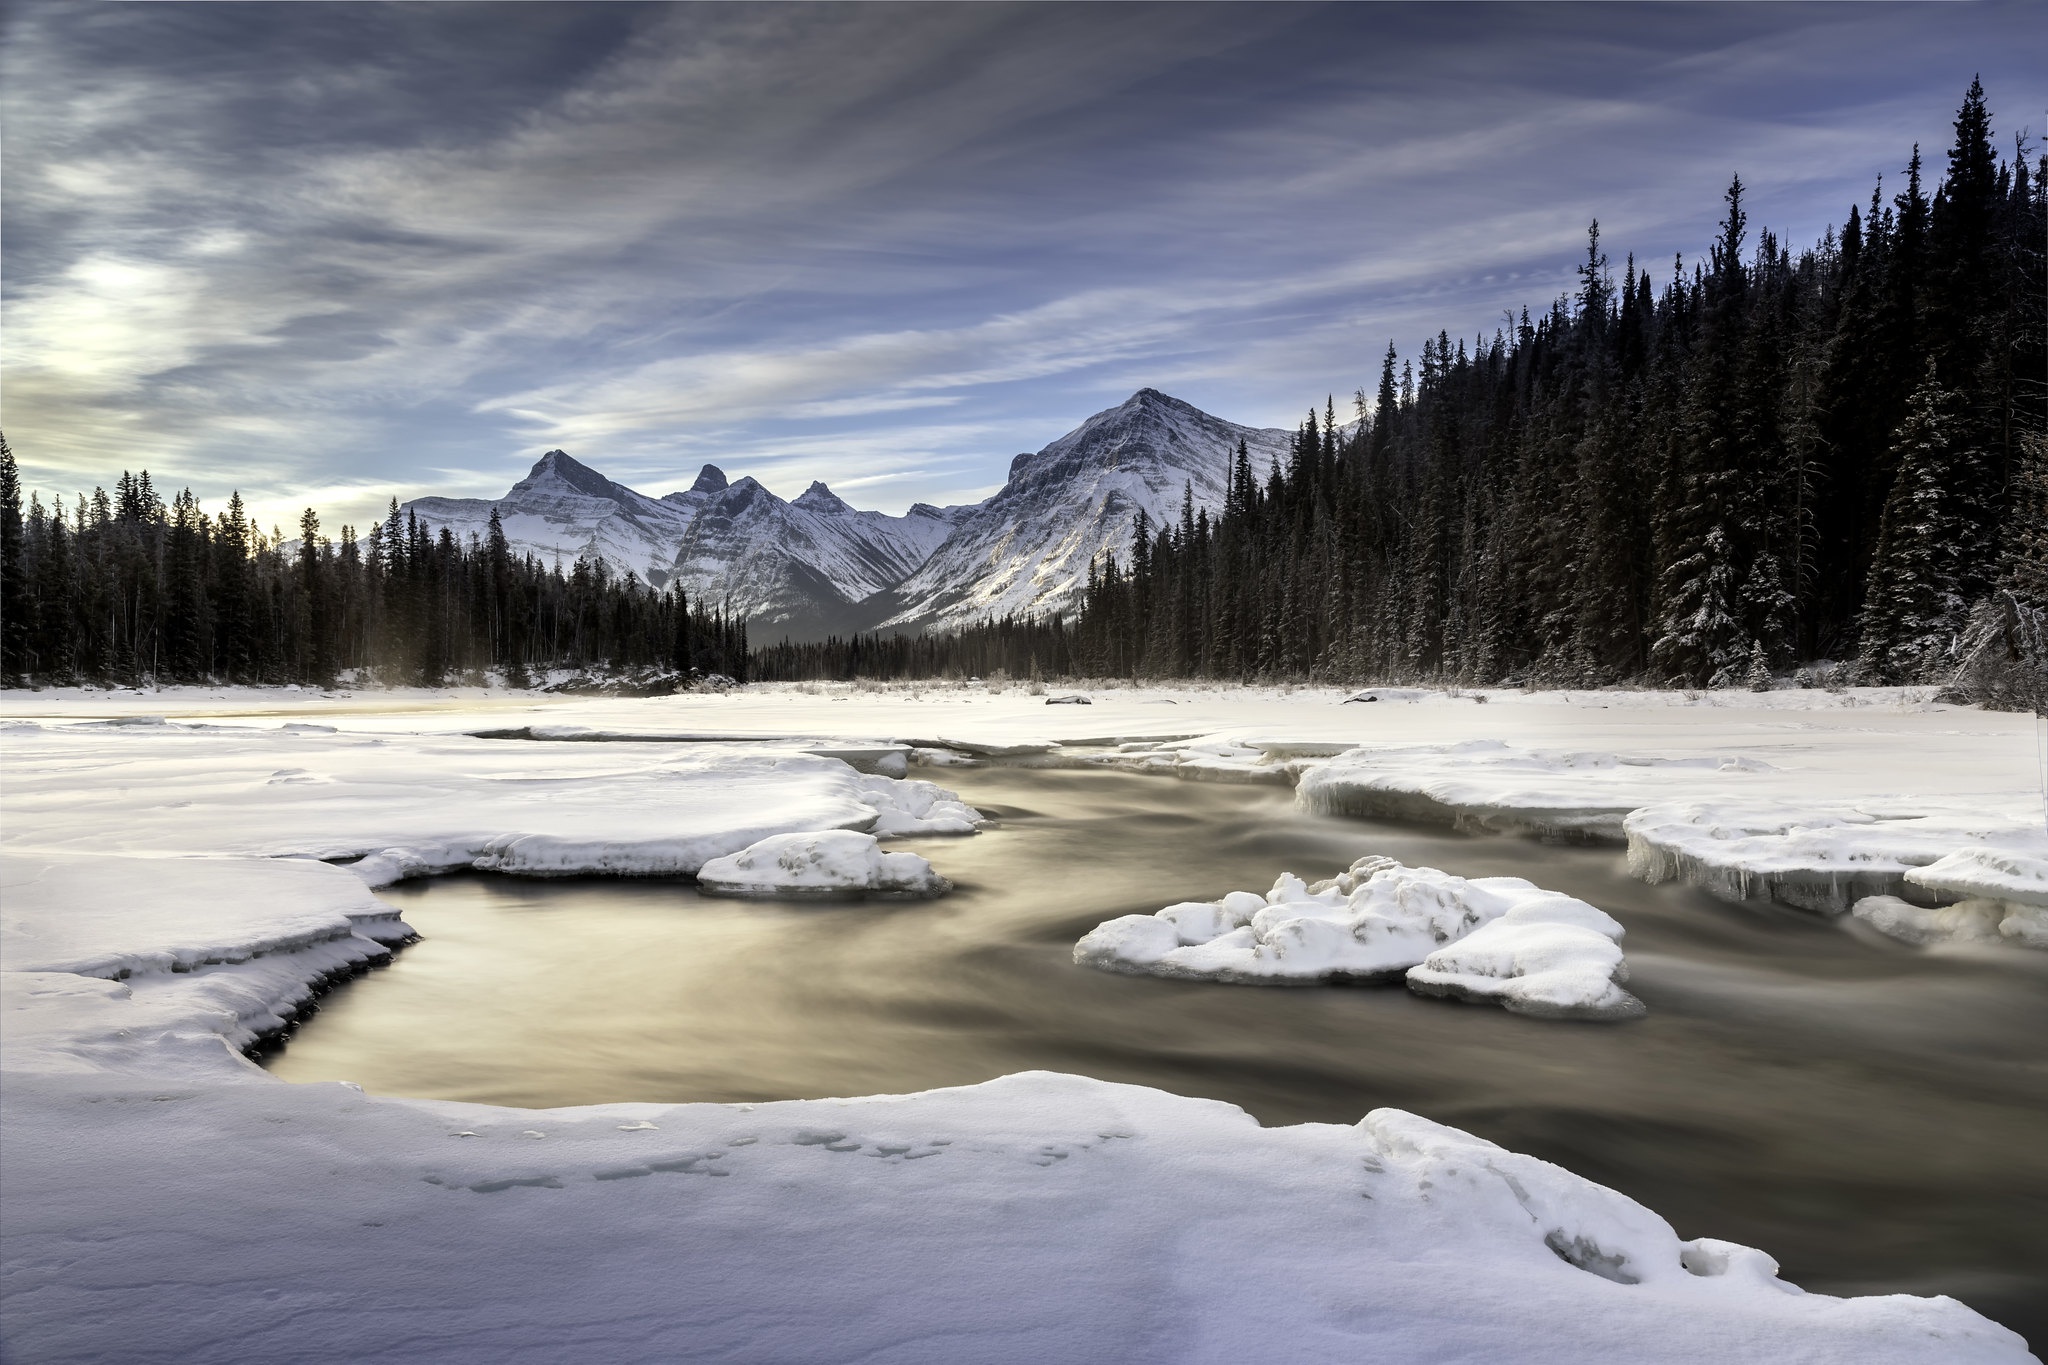 General 2048x1365 ice cold water winter nature Canada landscape